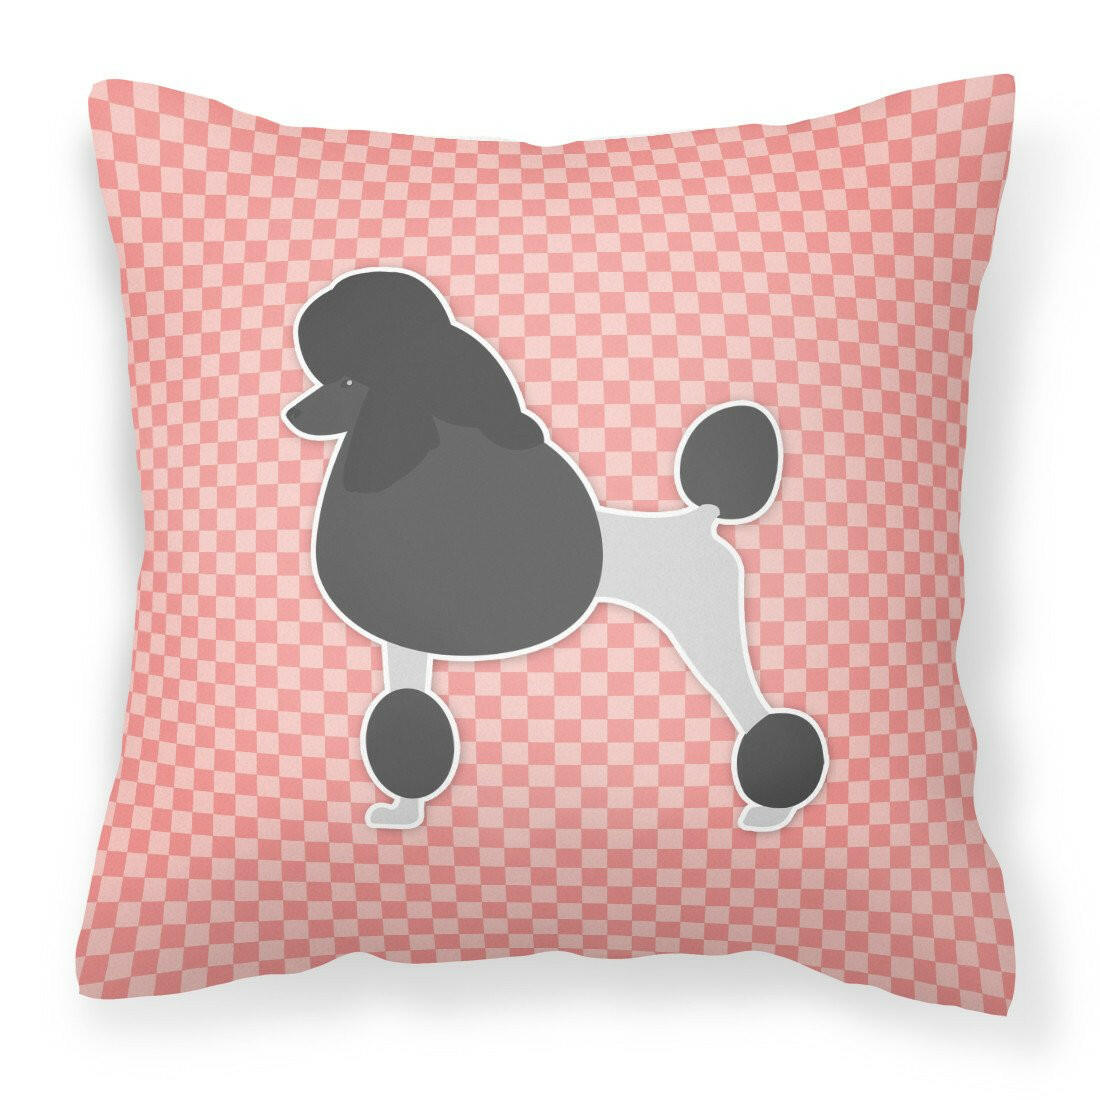 Poodle Checkerboard Pink Fabric Decorative Pillow BB3639PW1818 by Caroline's Treasures